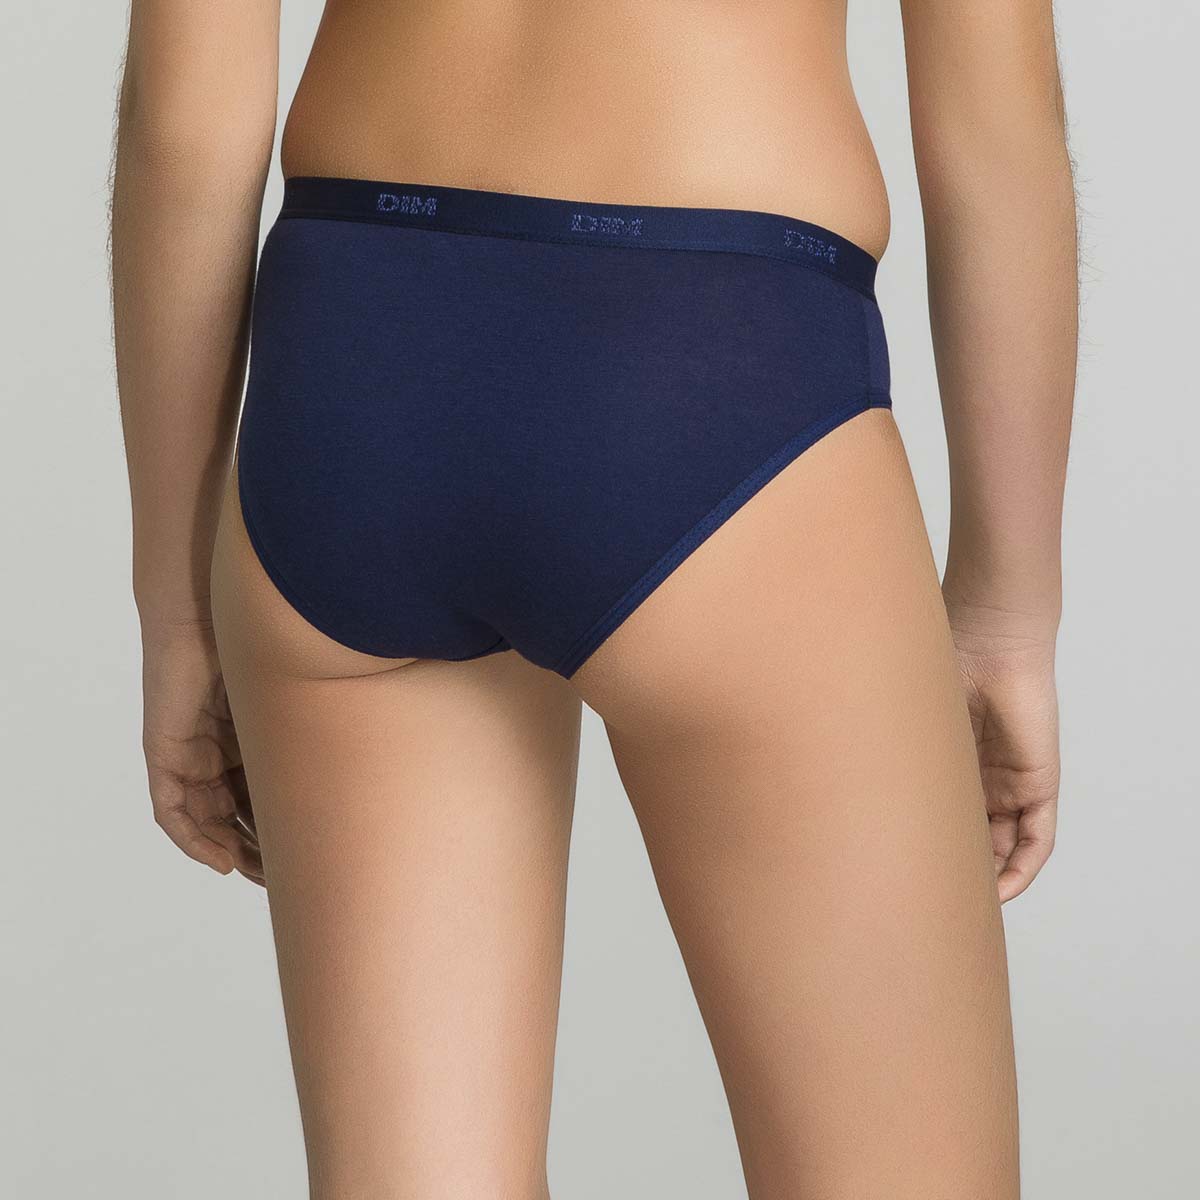 Pack of 3 blue stretch cotton briefs with geometric patterns Les